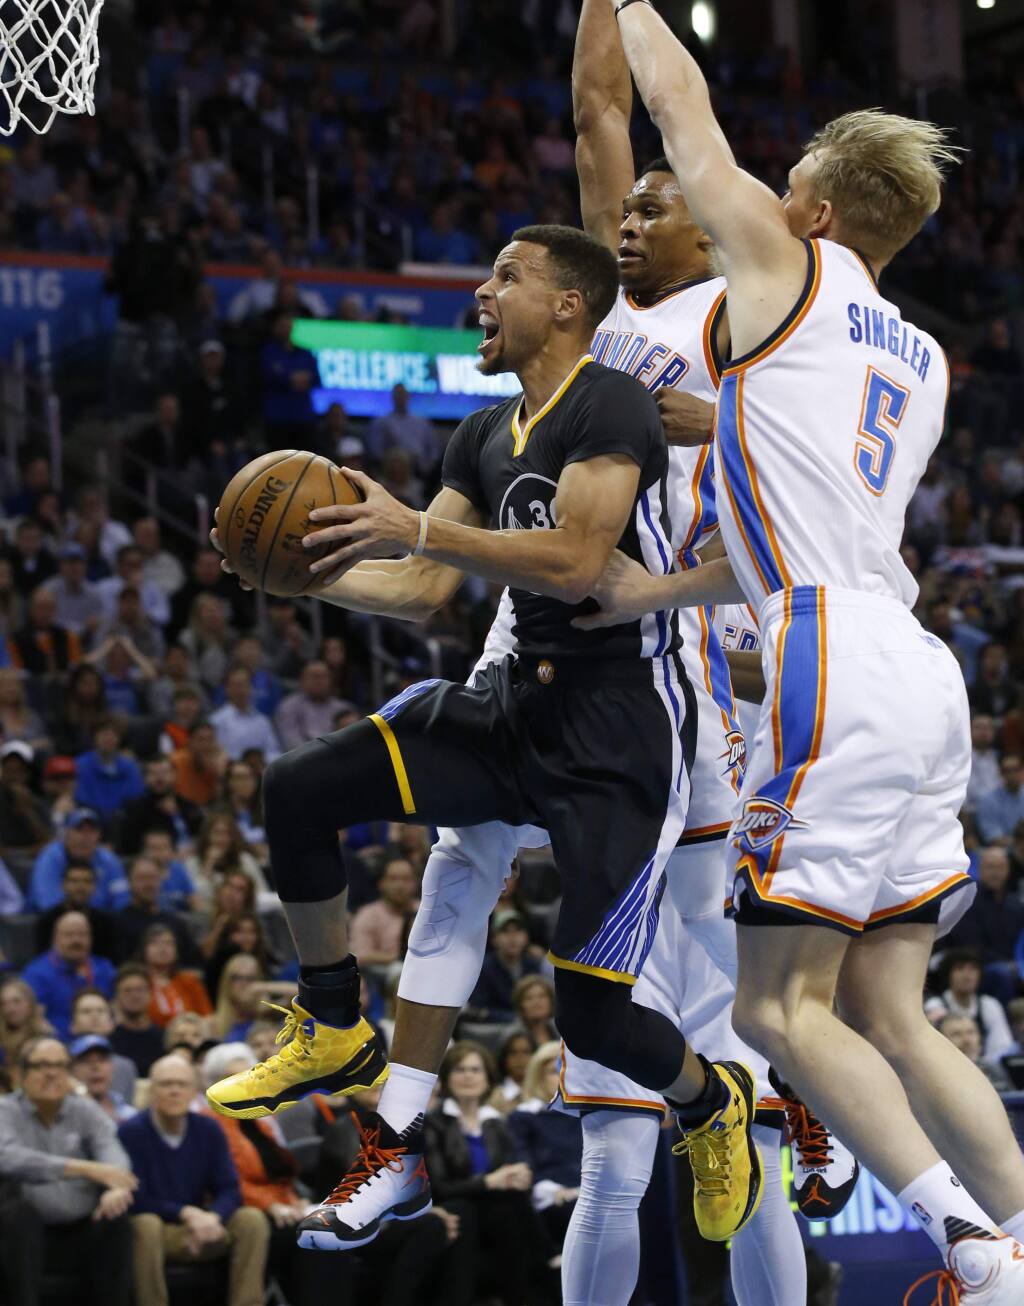 Stephen Curry Leads All Scorers With 32 Points In Victory Over OKC